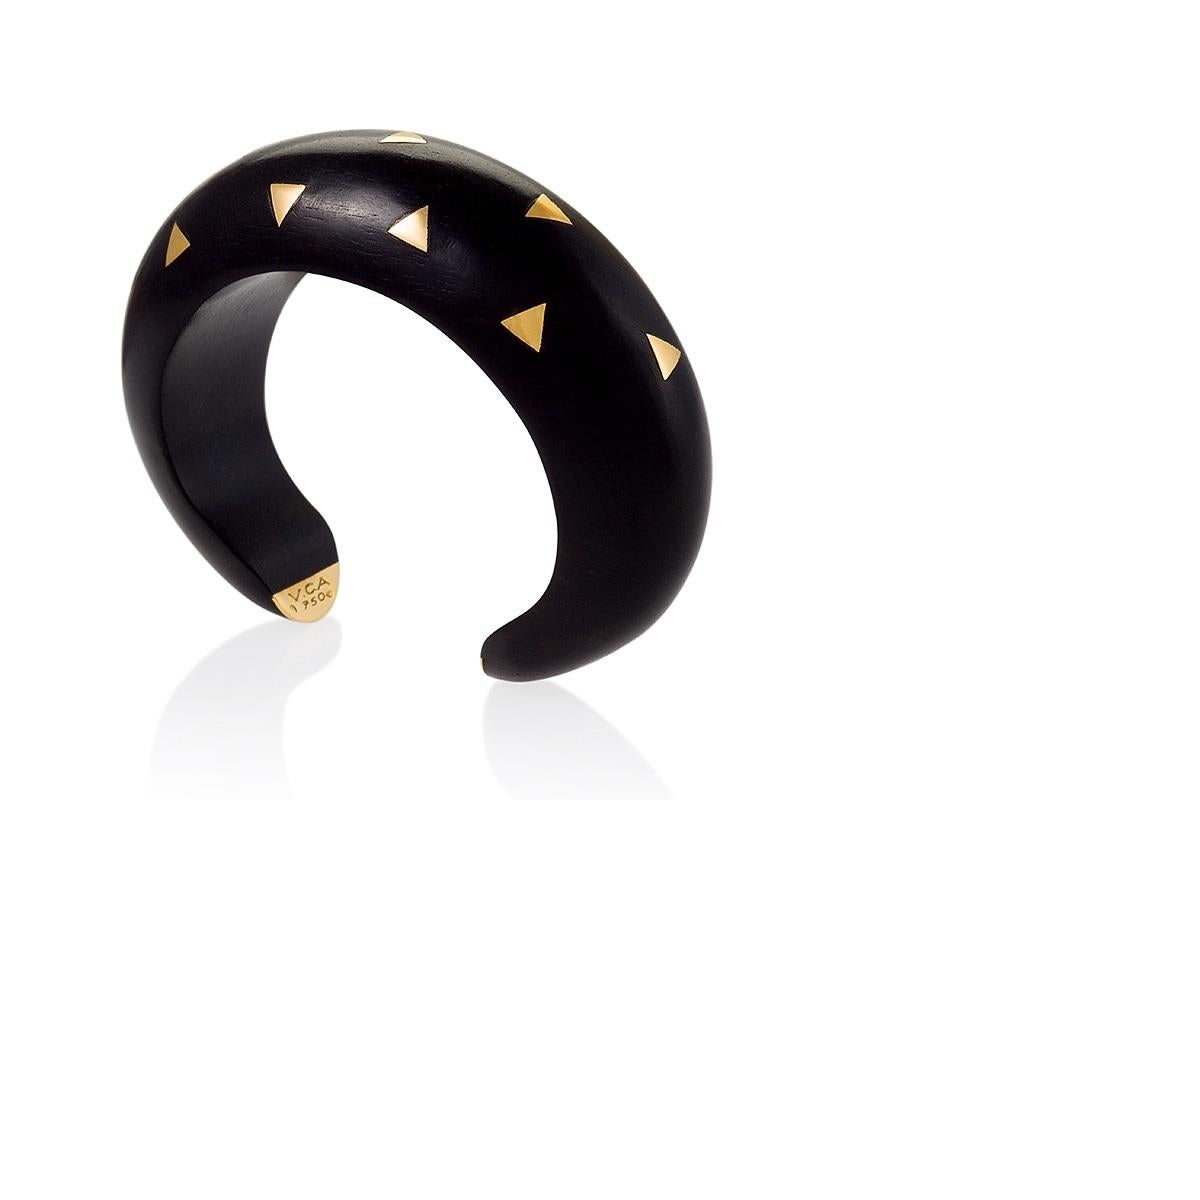 A French Late-20th Century ebony cuff with 18 karat gold accents by Van Cleef & Arpels. Van Cleef & Arpels have been designing and making wood jewelry since the 1920's.  Circa 1987-93.

Similar from the collection pictured in Van Cleef & Arpels, by